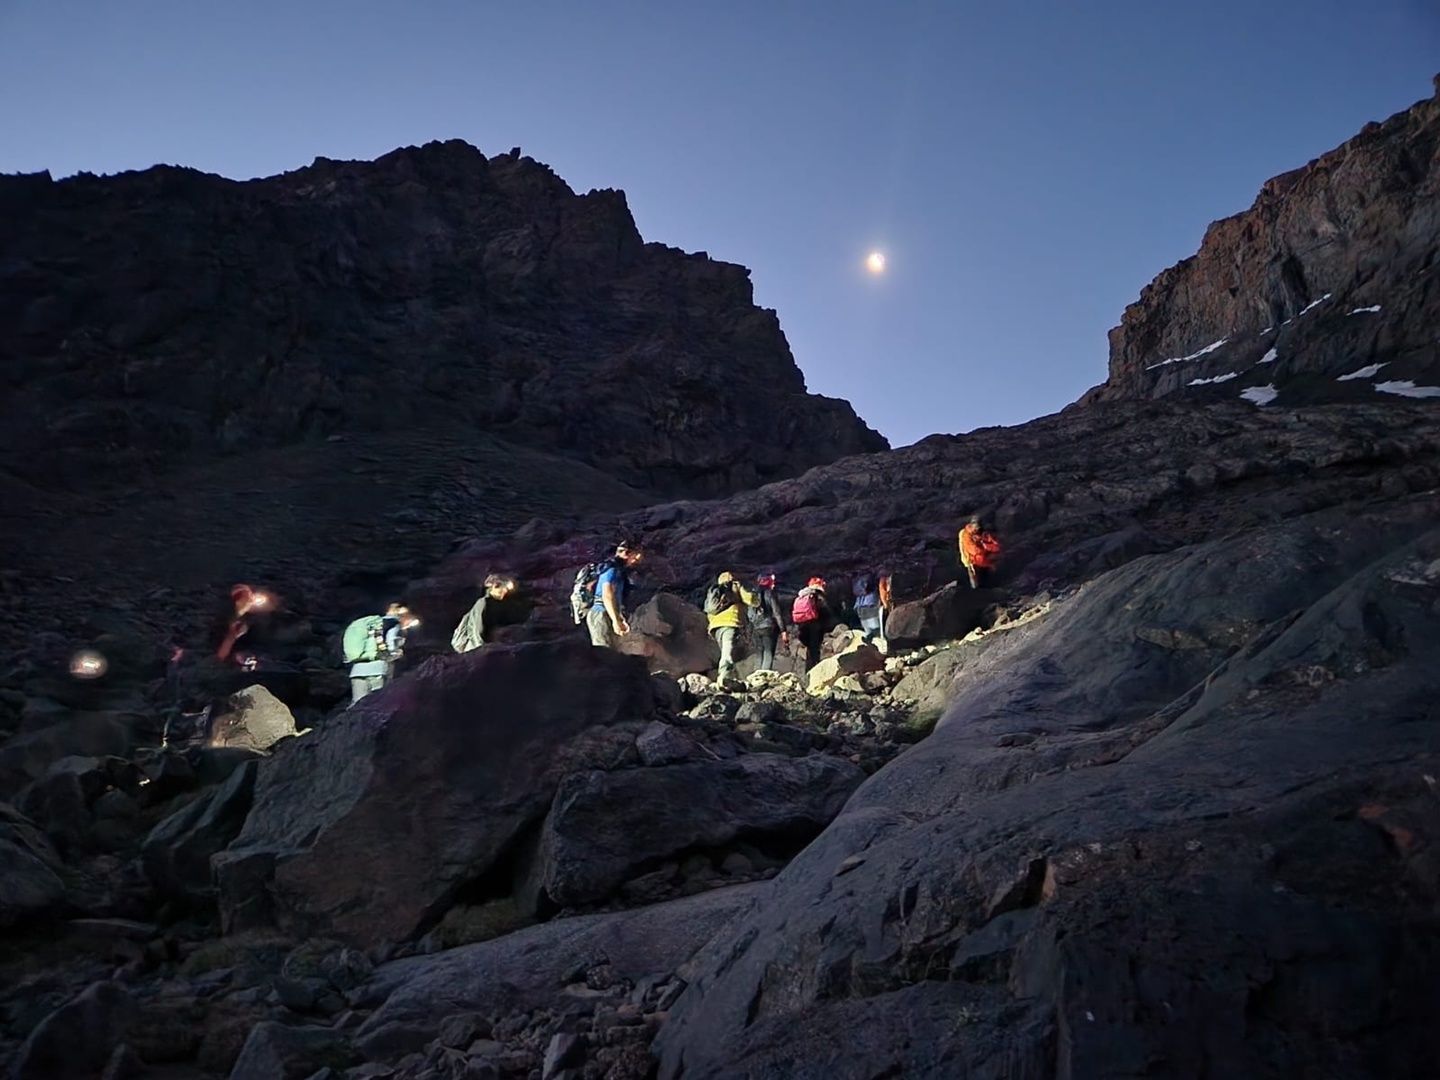 Setting off to climb Toubkal in the early morning. Photo: Aztat Treks.